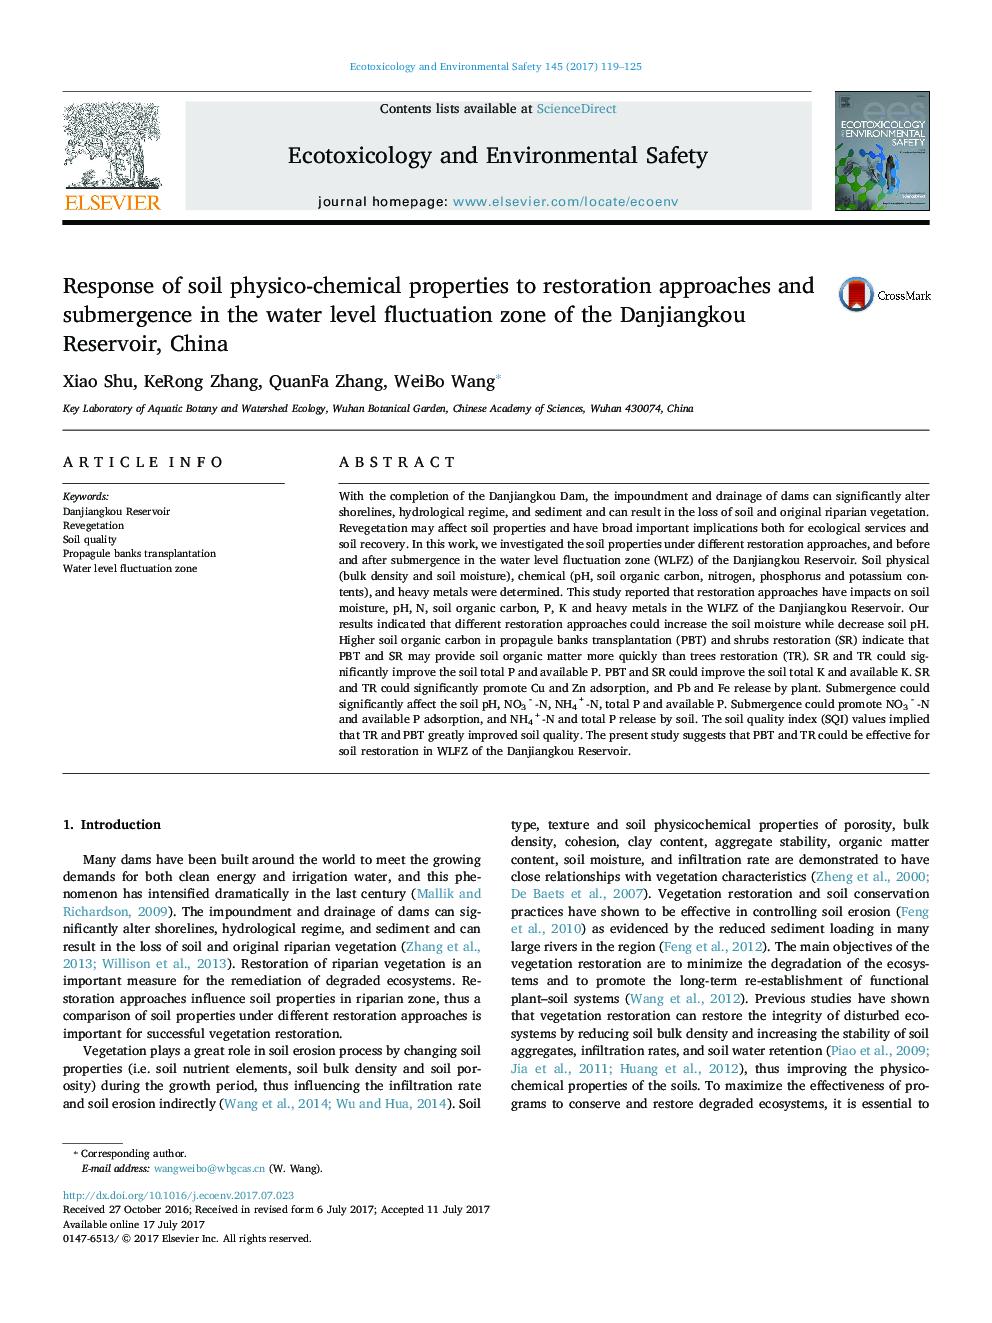 Response of soil physico-chemical properties to restoration approaches and submergence in the water level fluctuation zone of the Danjiangkou Reservoir, China